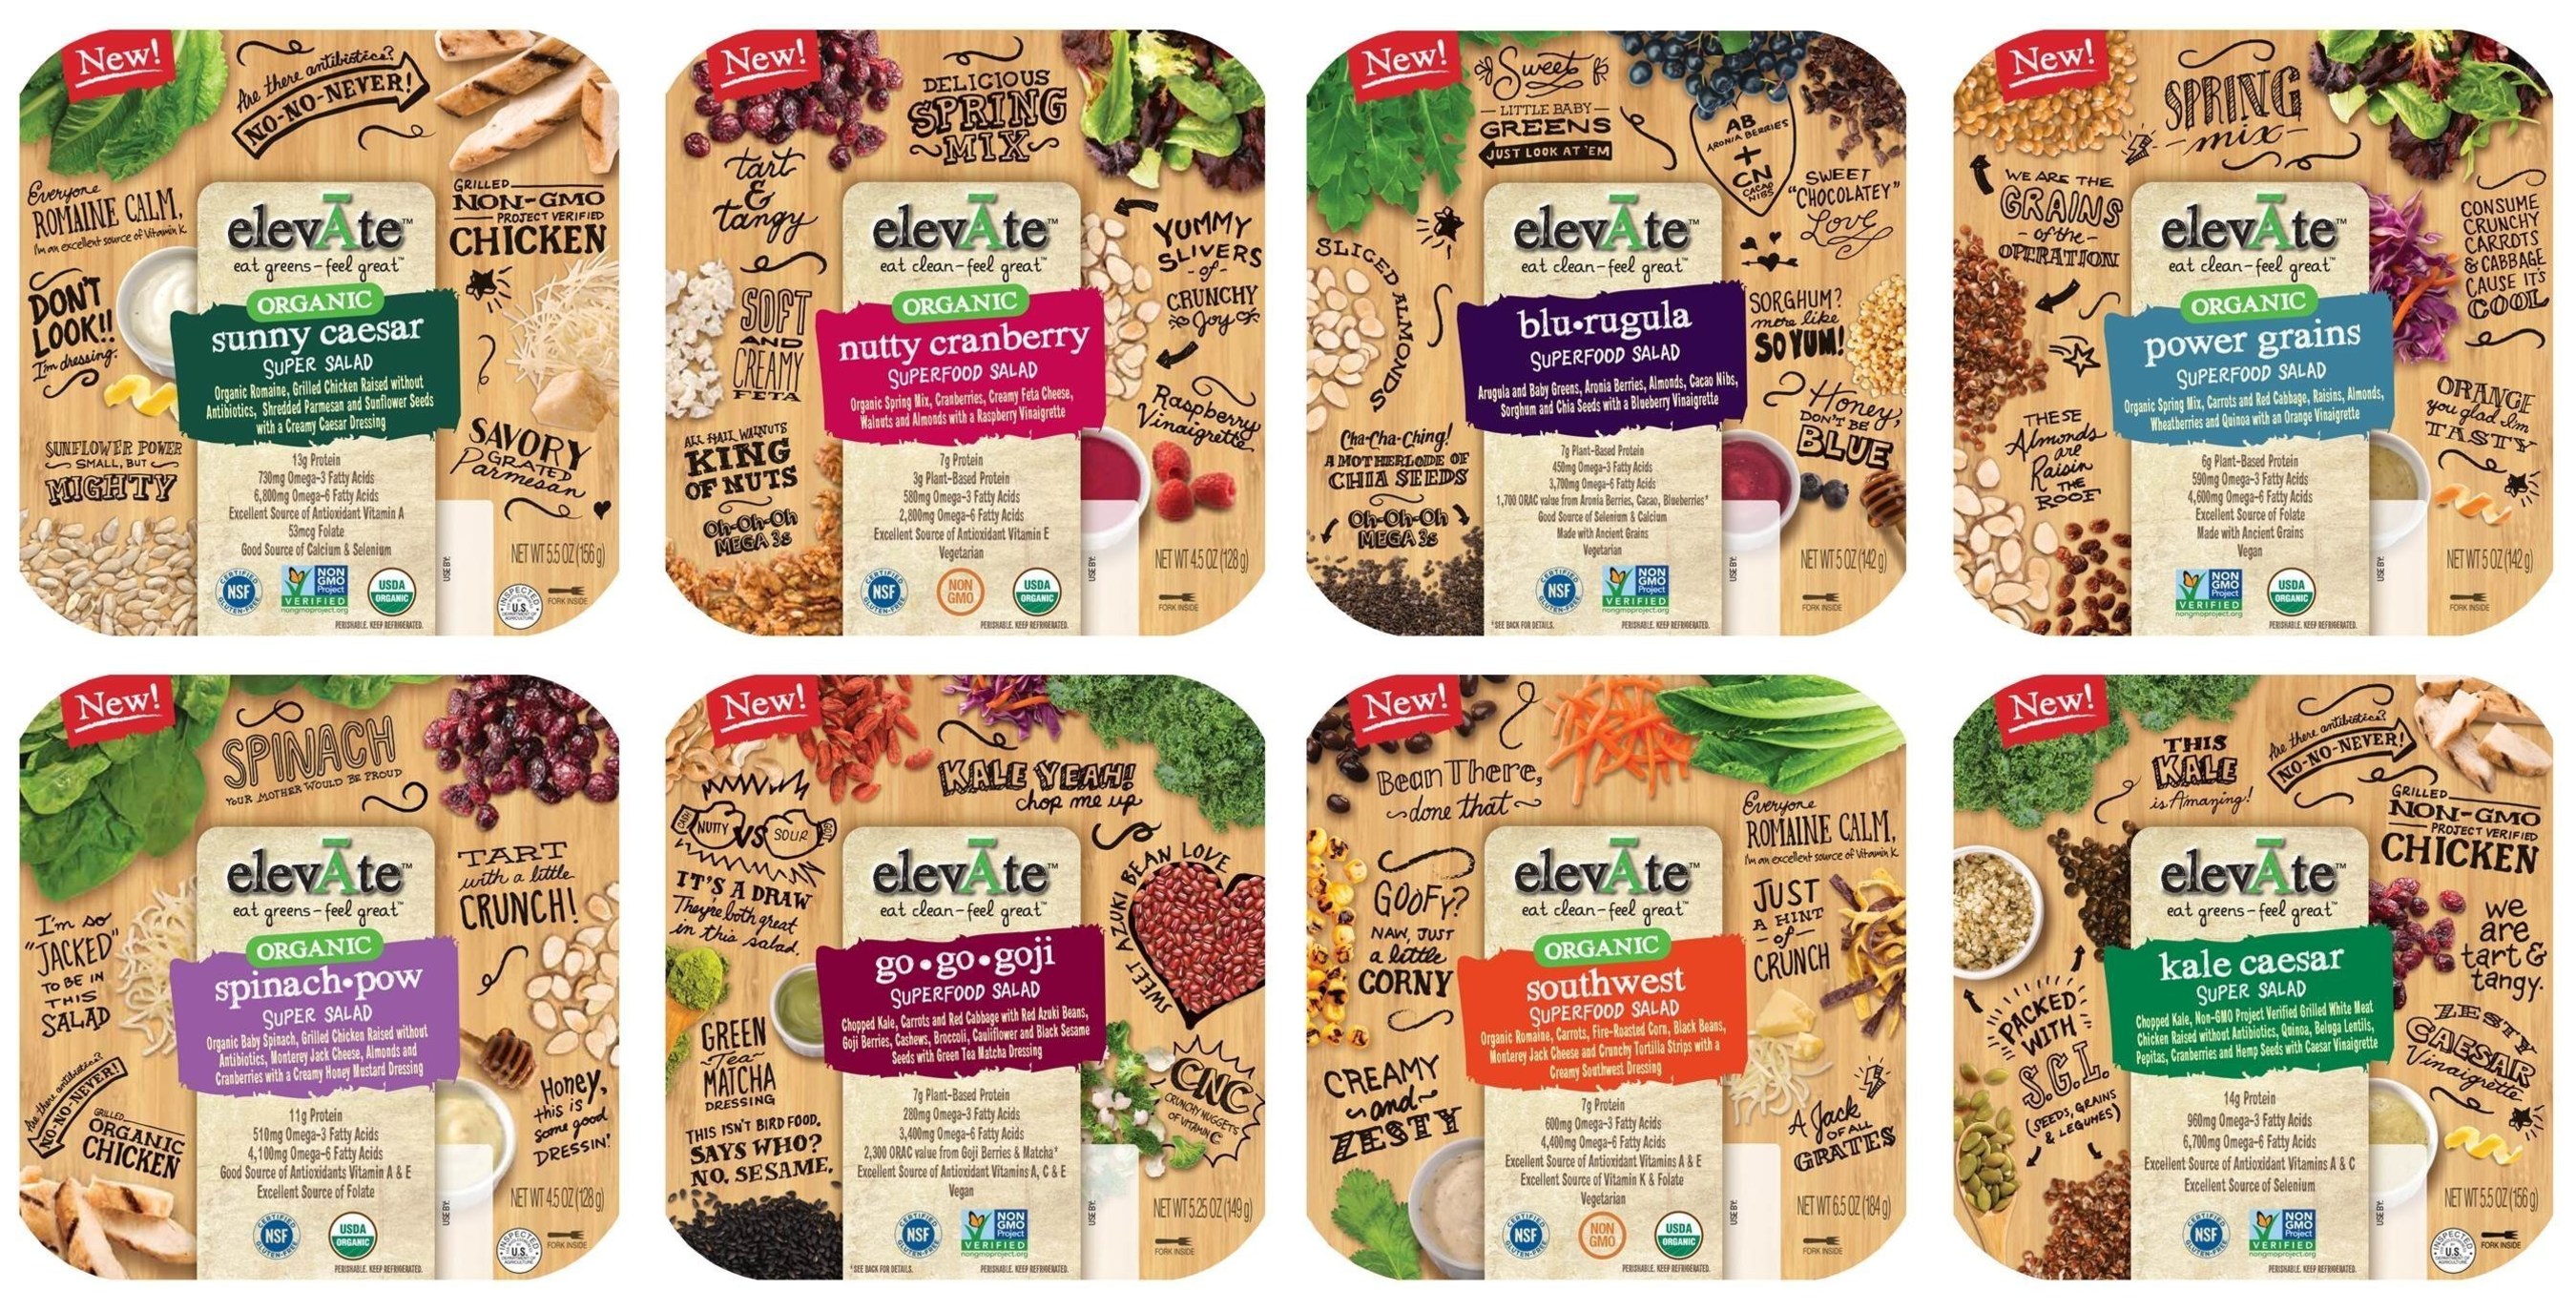 Ready Pac Foods launches 'elevAte,' a brand new collection of ready-to-eat superfood salad blends.